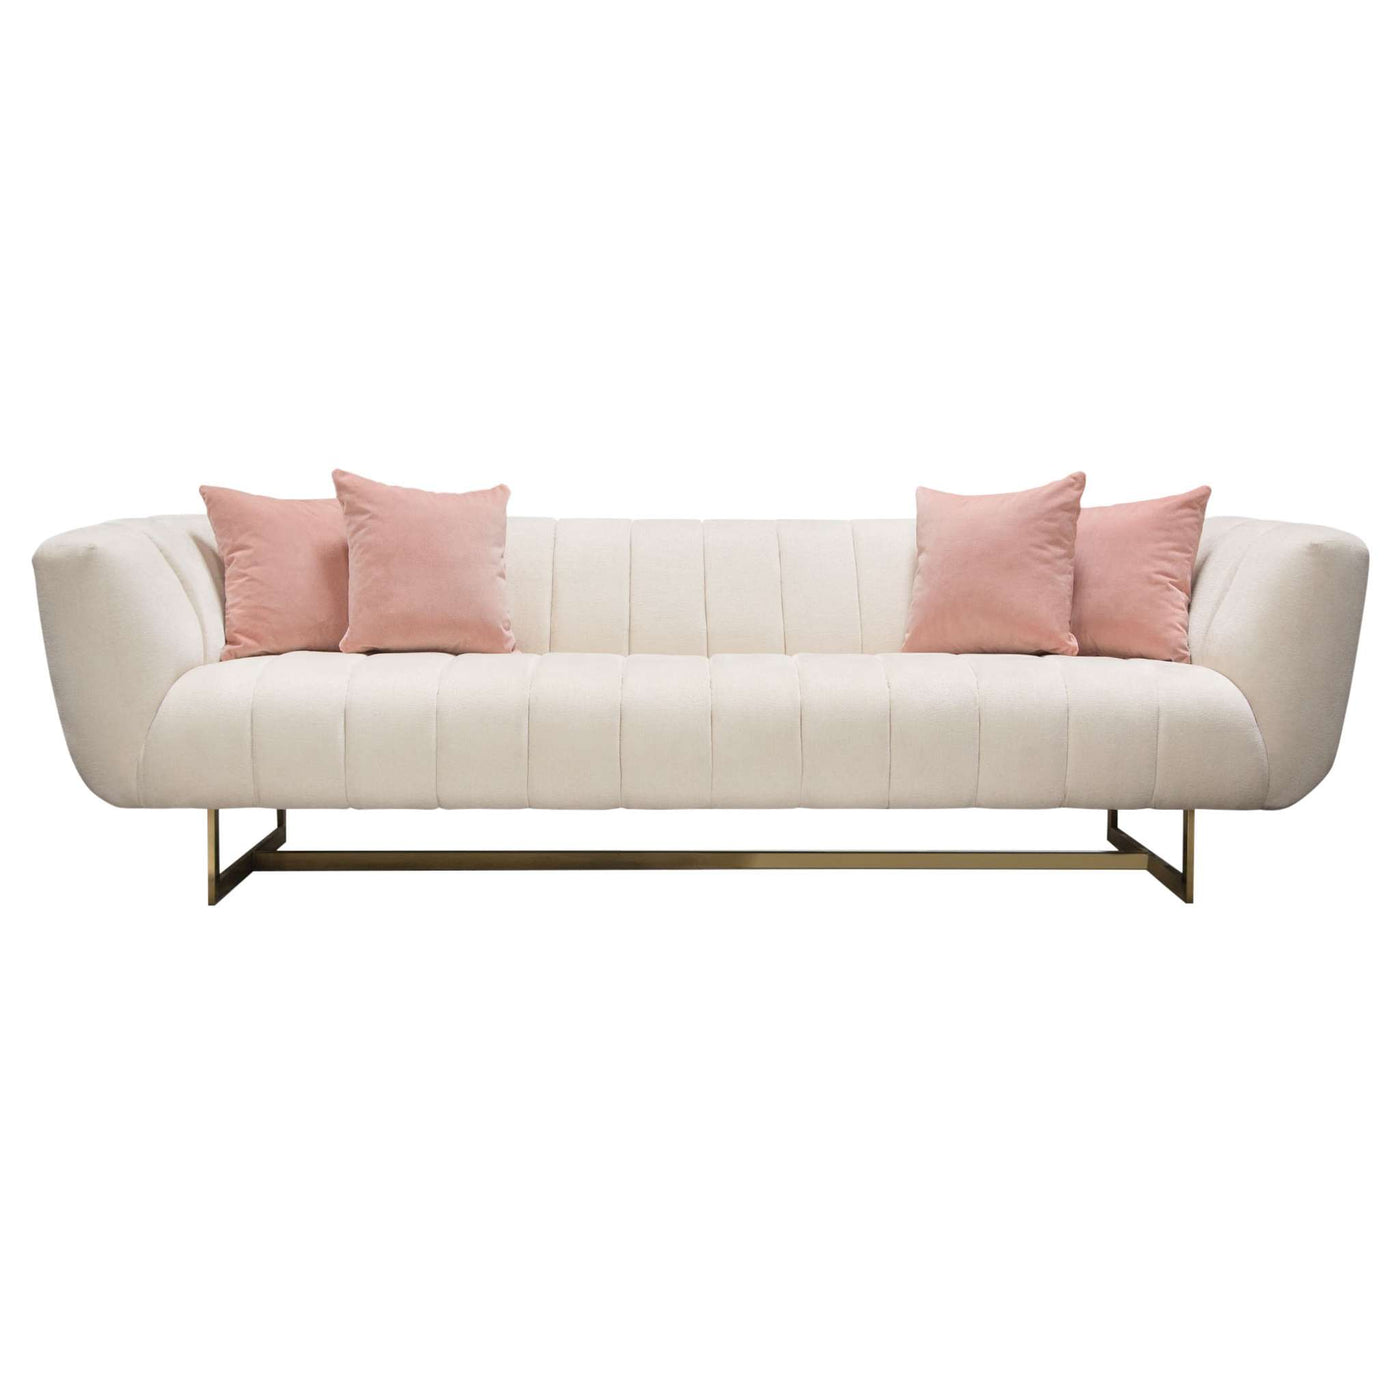 Venus Sofa in Blush Pink Velvet w/ Contrasting Pillows & Gold Finished Metal Base by Diamond Sofa